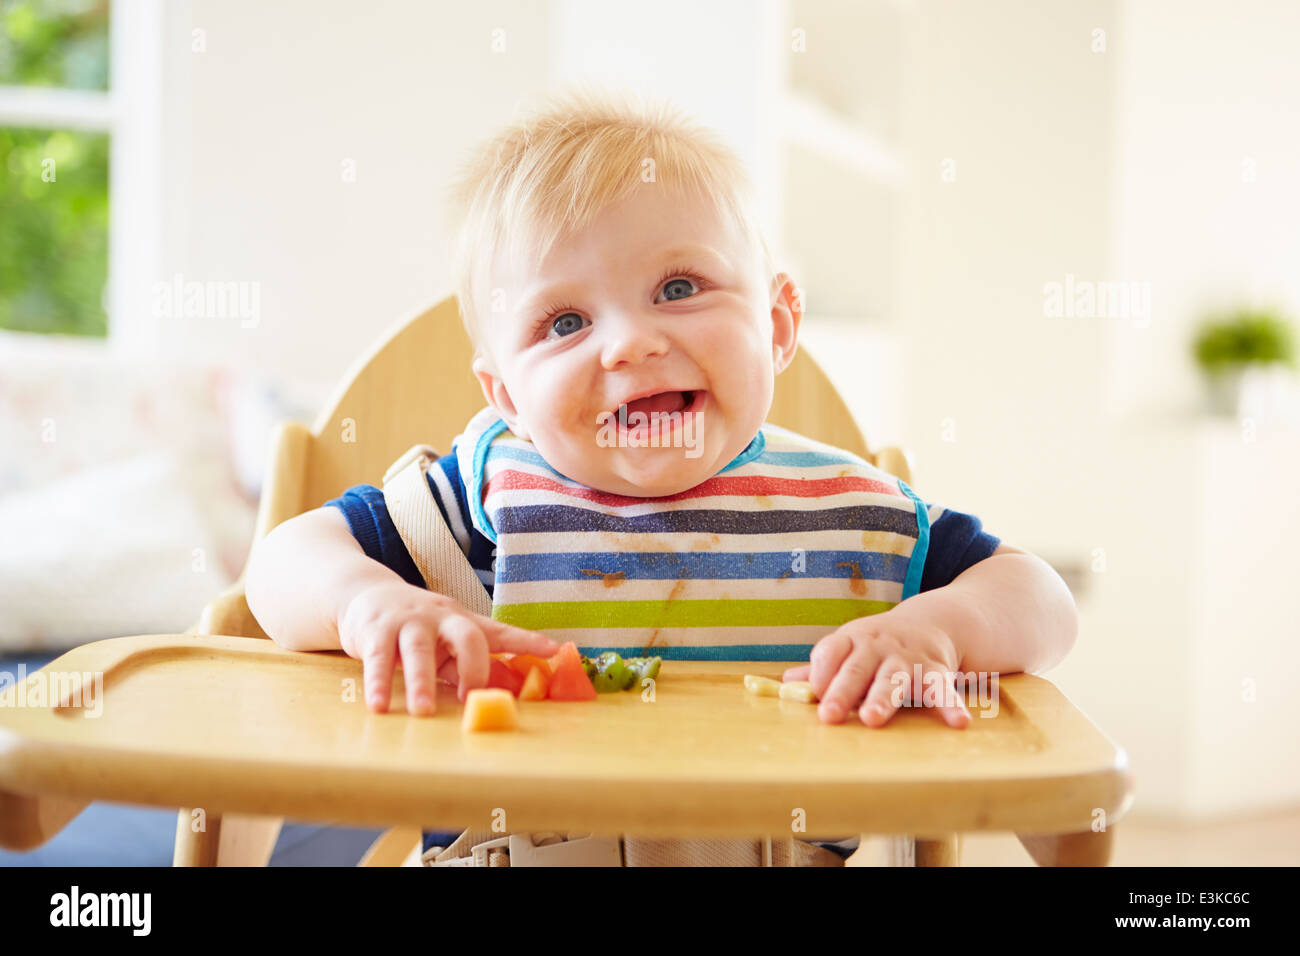 Baby Boy Eating Fruit In High Chair Stock Photo